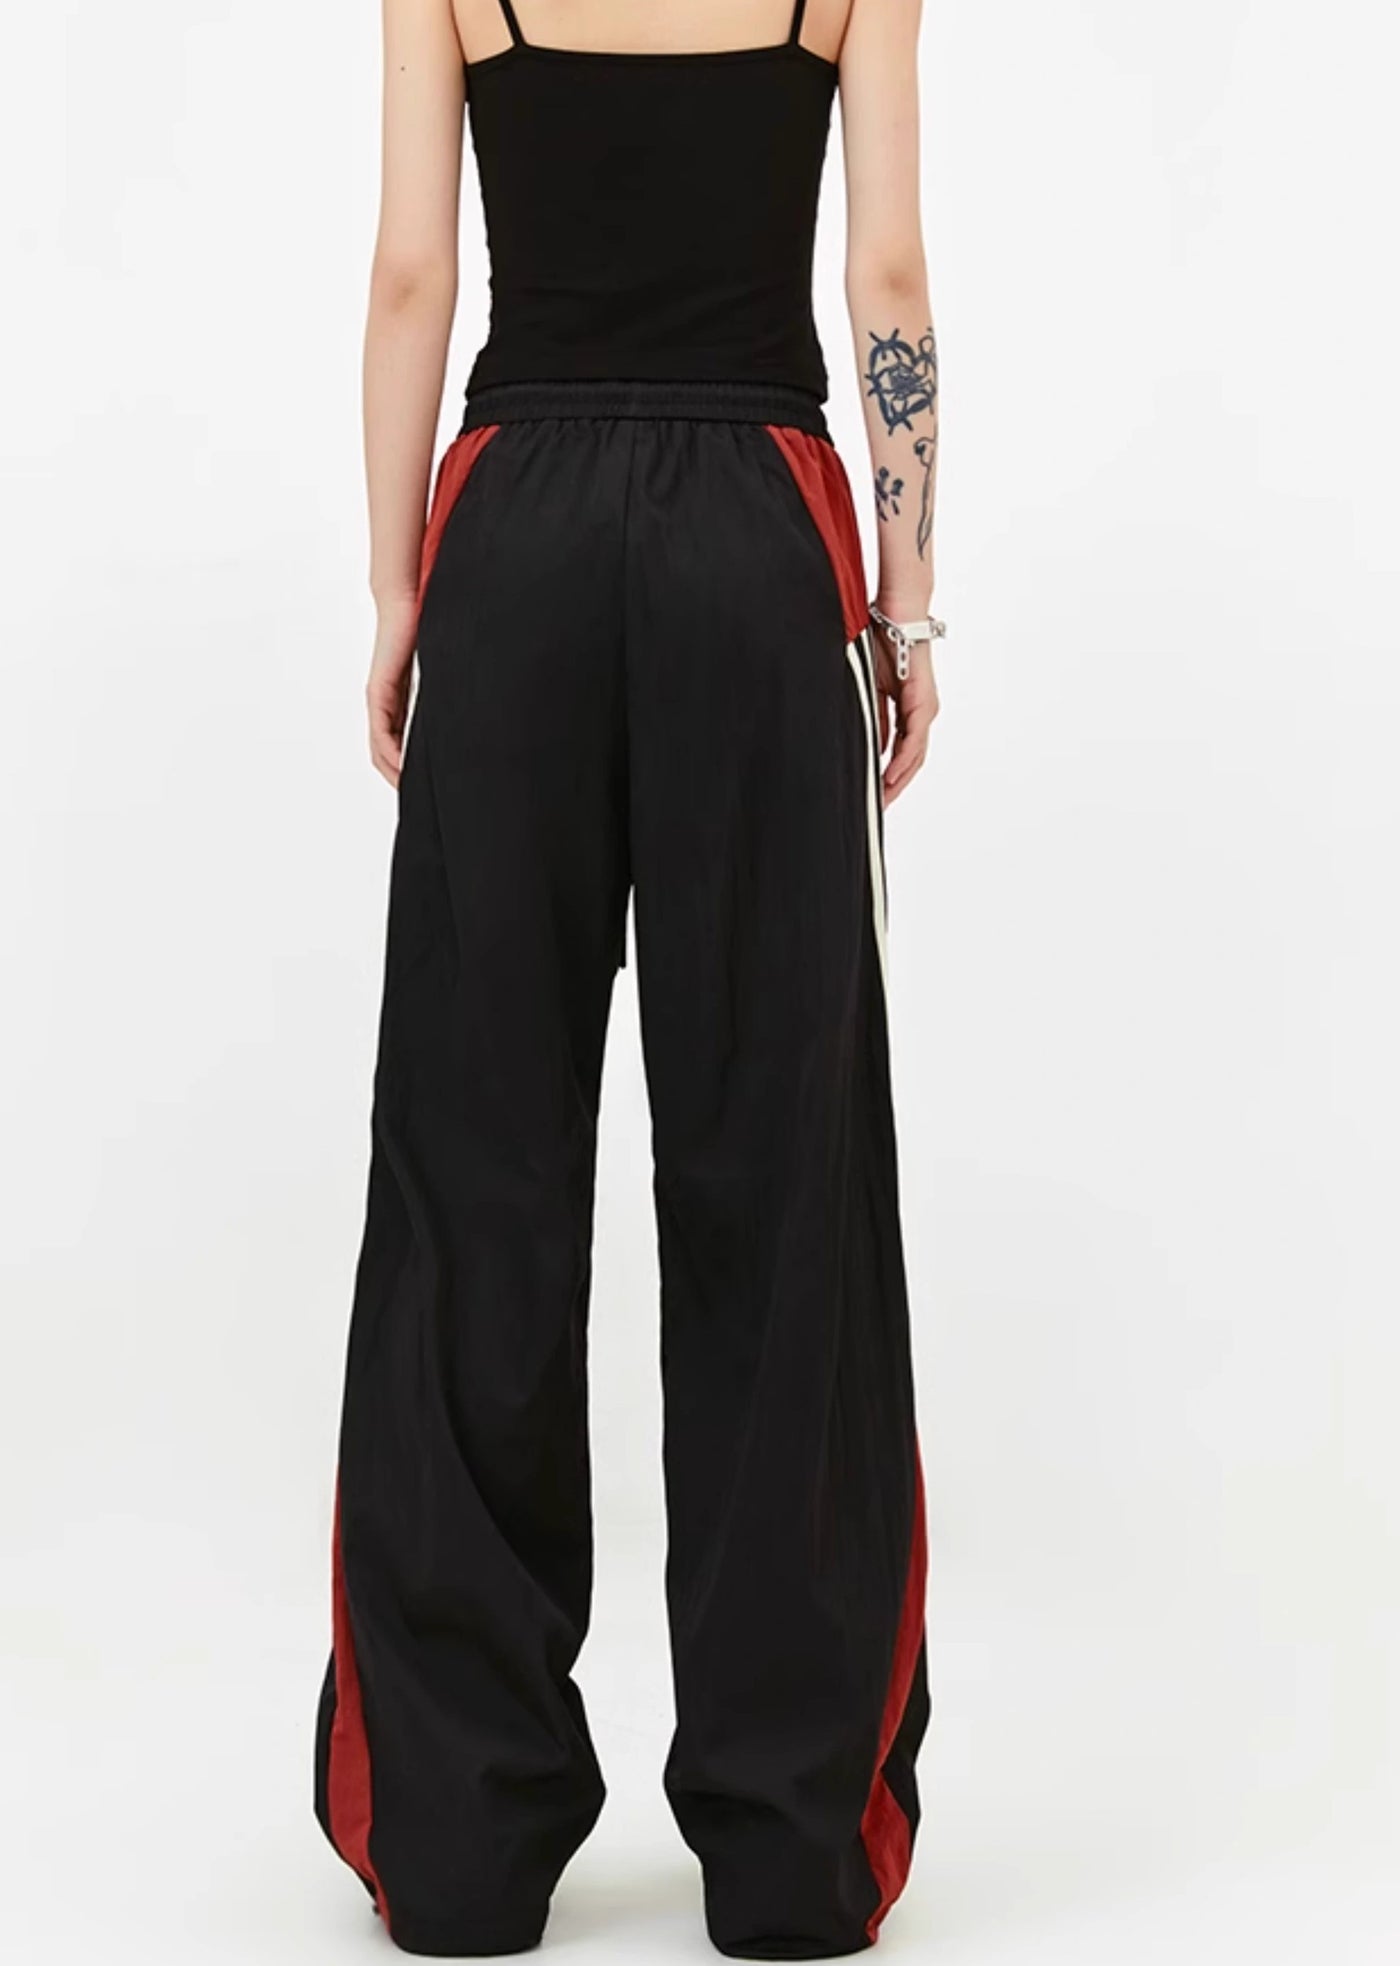 【MADEEXTREME】Sideline sporty casual design wide pants  MT0002